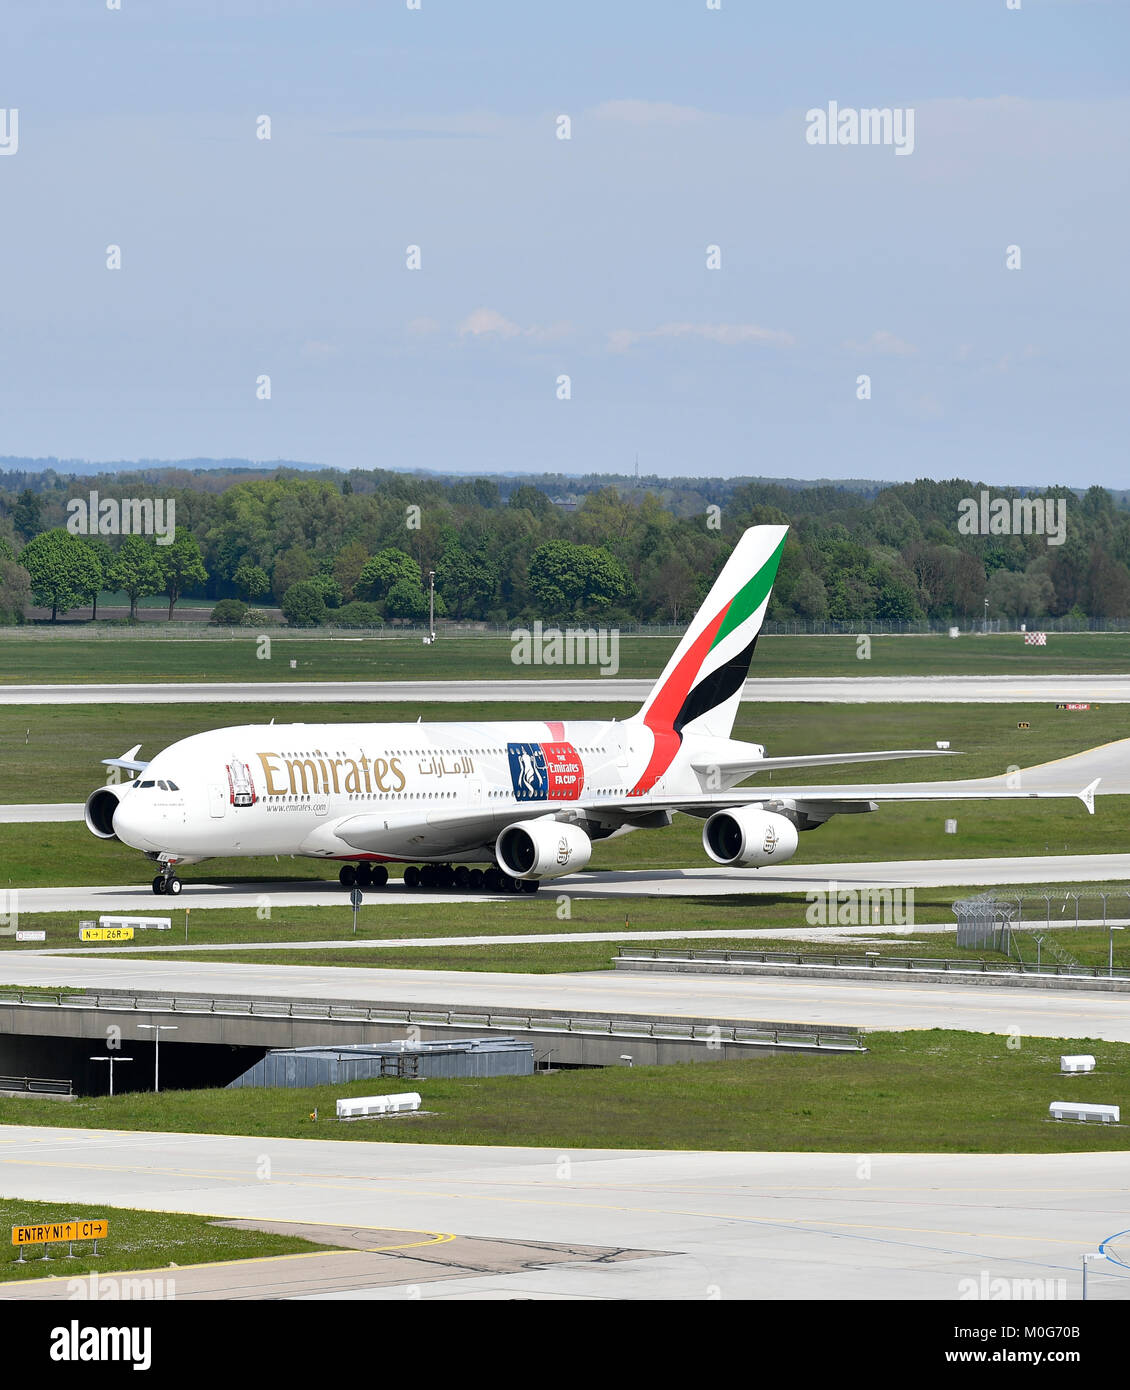 Emirates, Airbus, A380-800, A380, 800, Airplane, Aircraft, Plane, Munich Airport, landing, runway, north, taxiway, Stock Photo